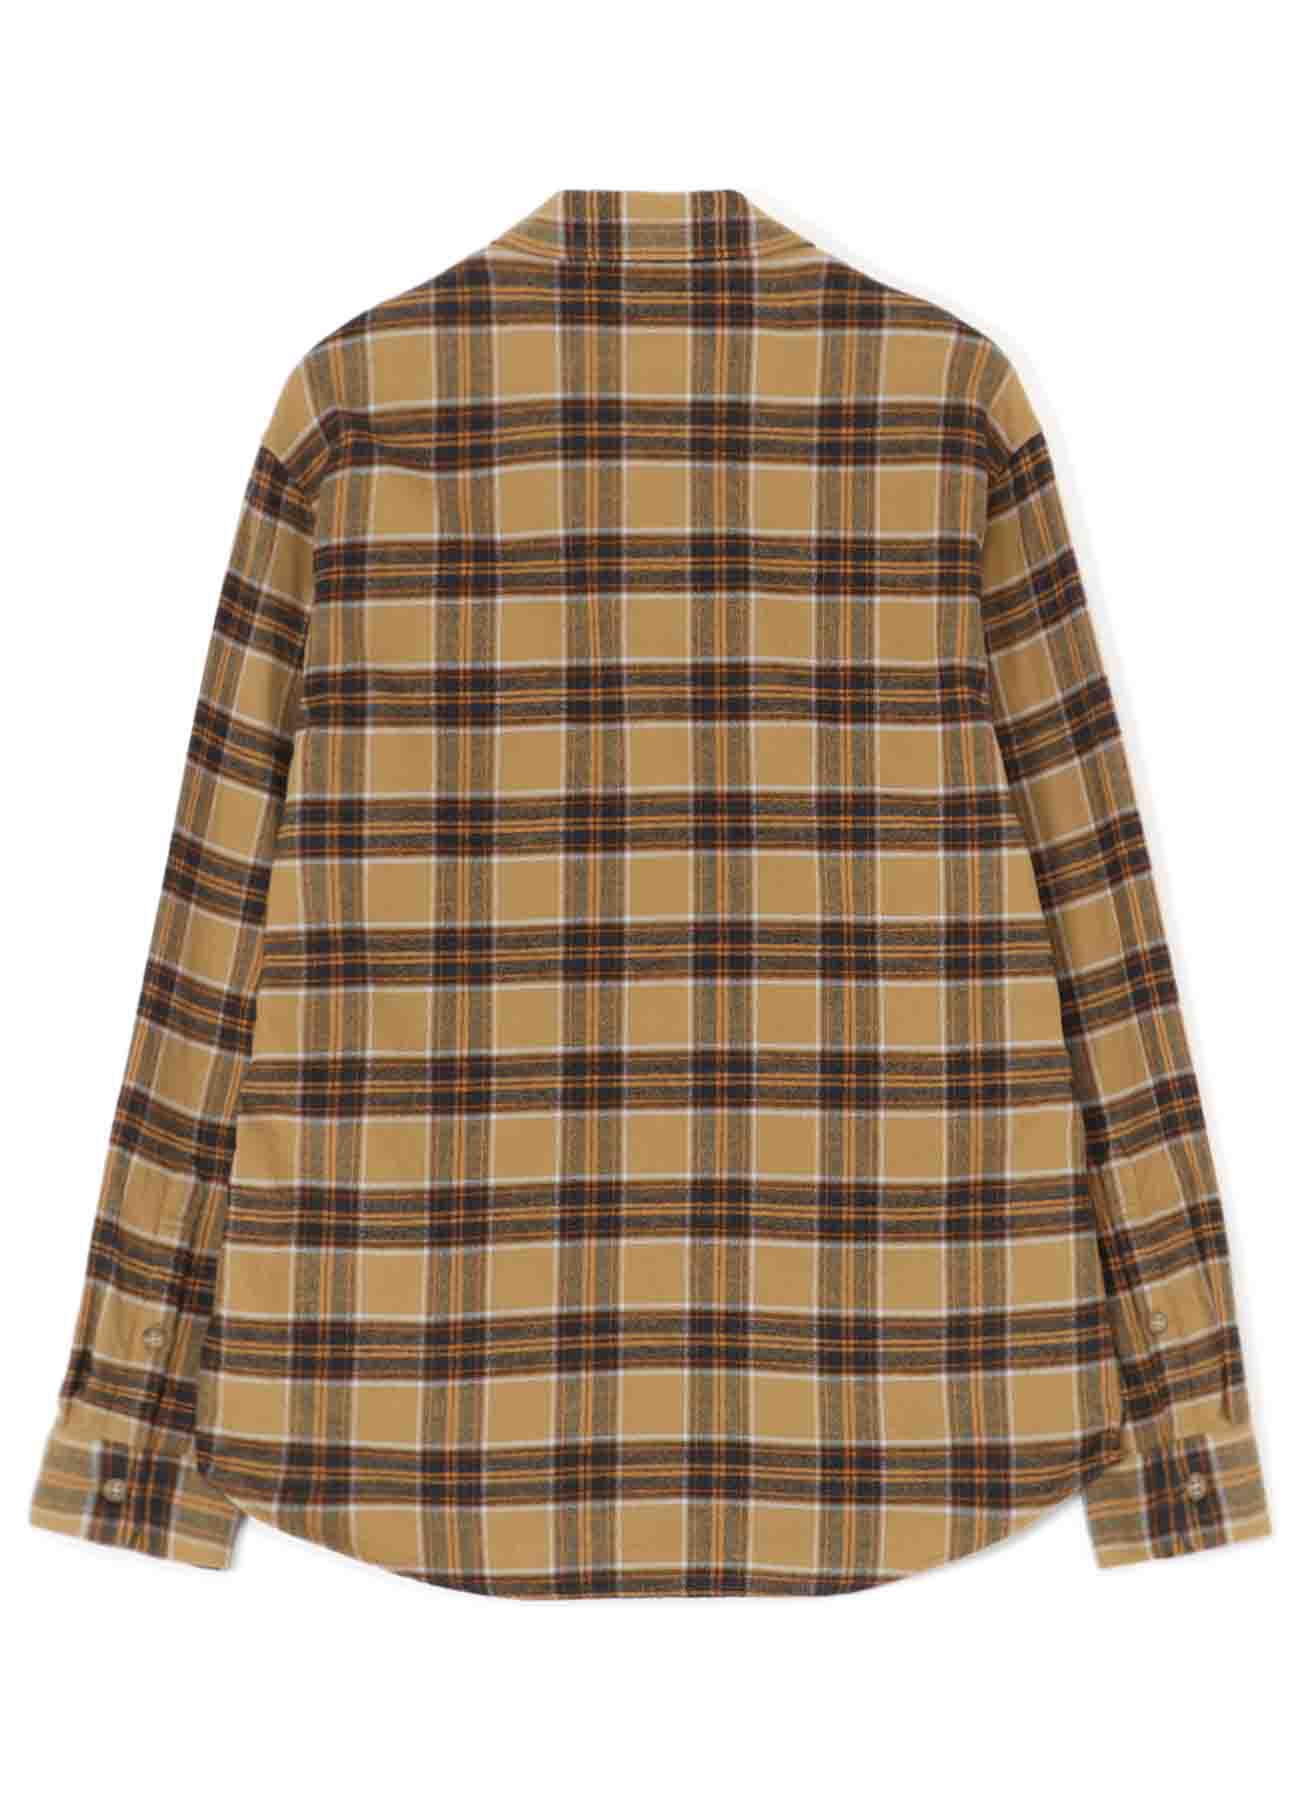 PLAID FLANNEL SHIRT WITH BIG CHEST POCKET